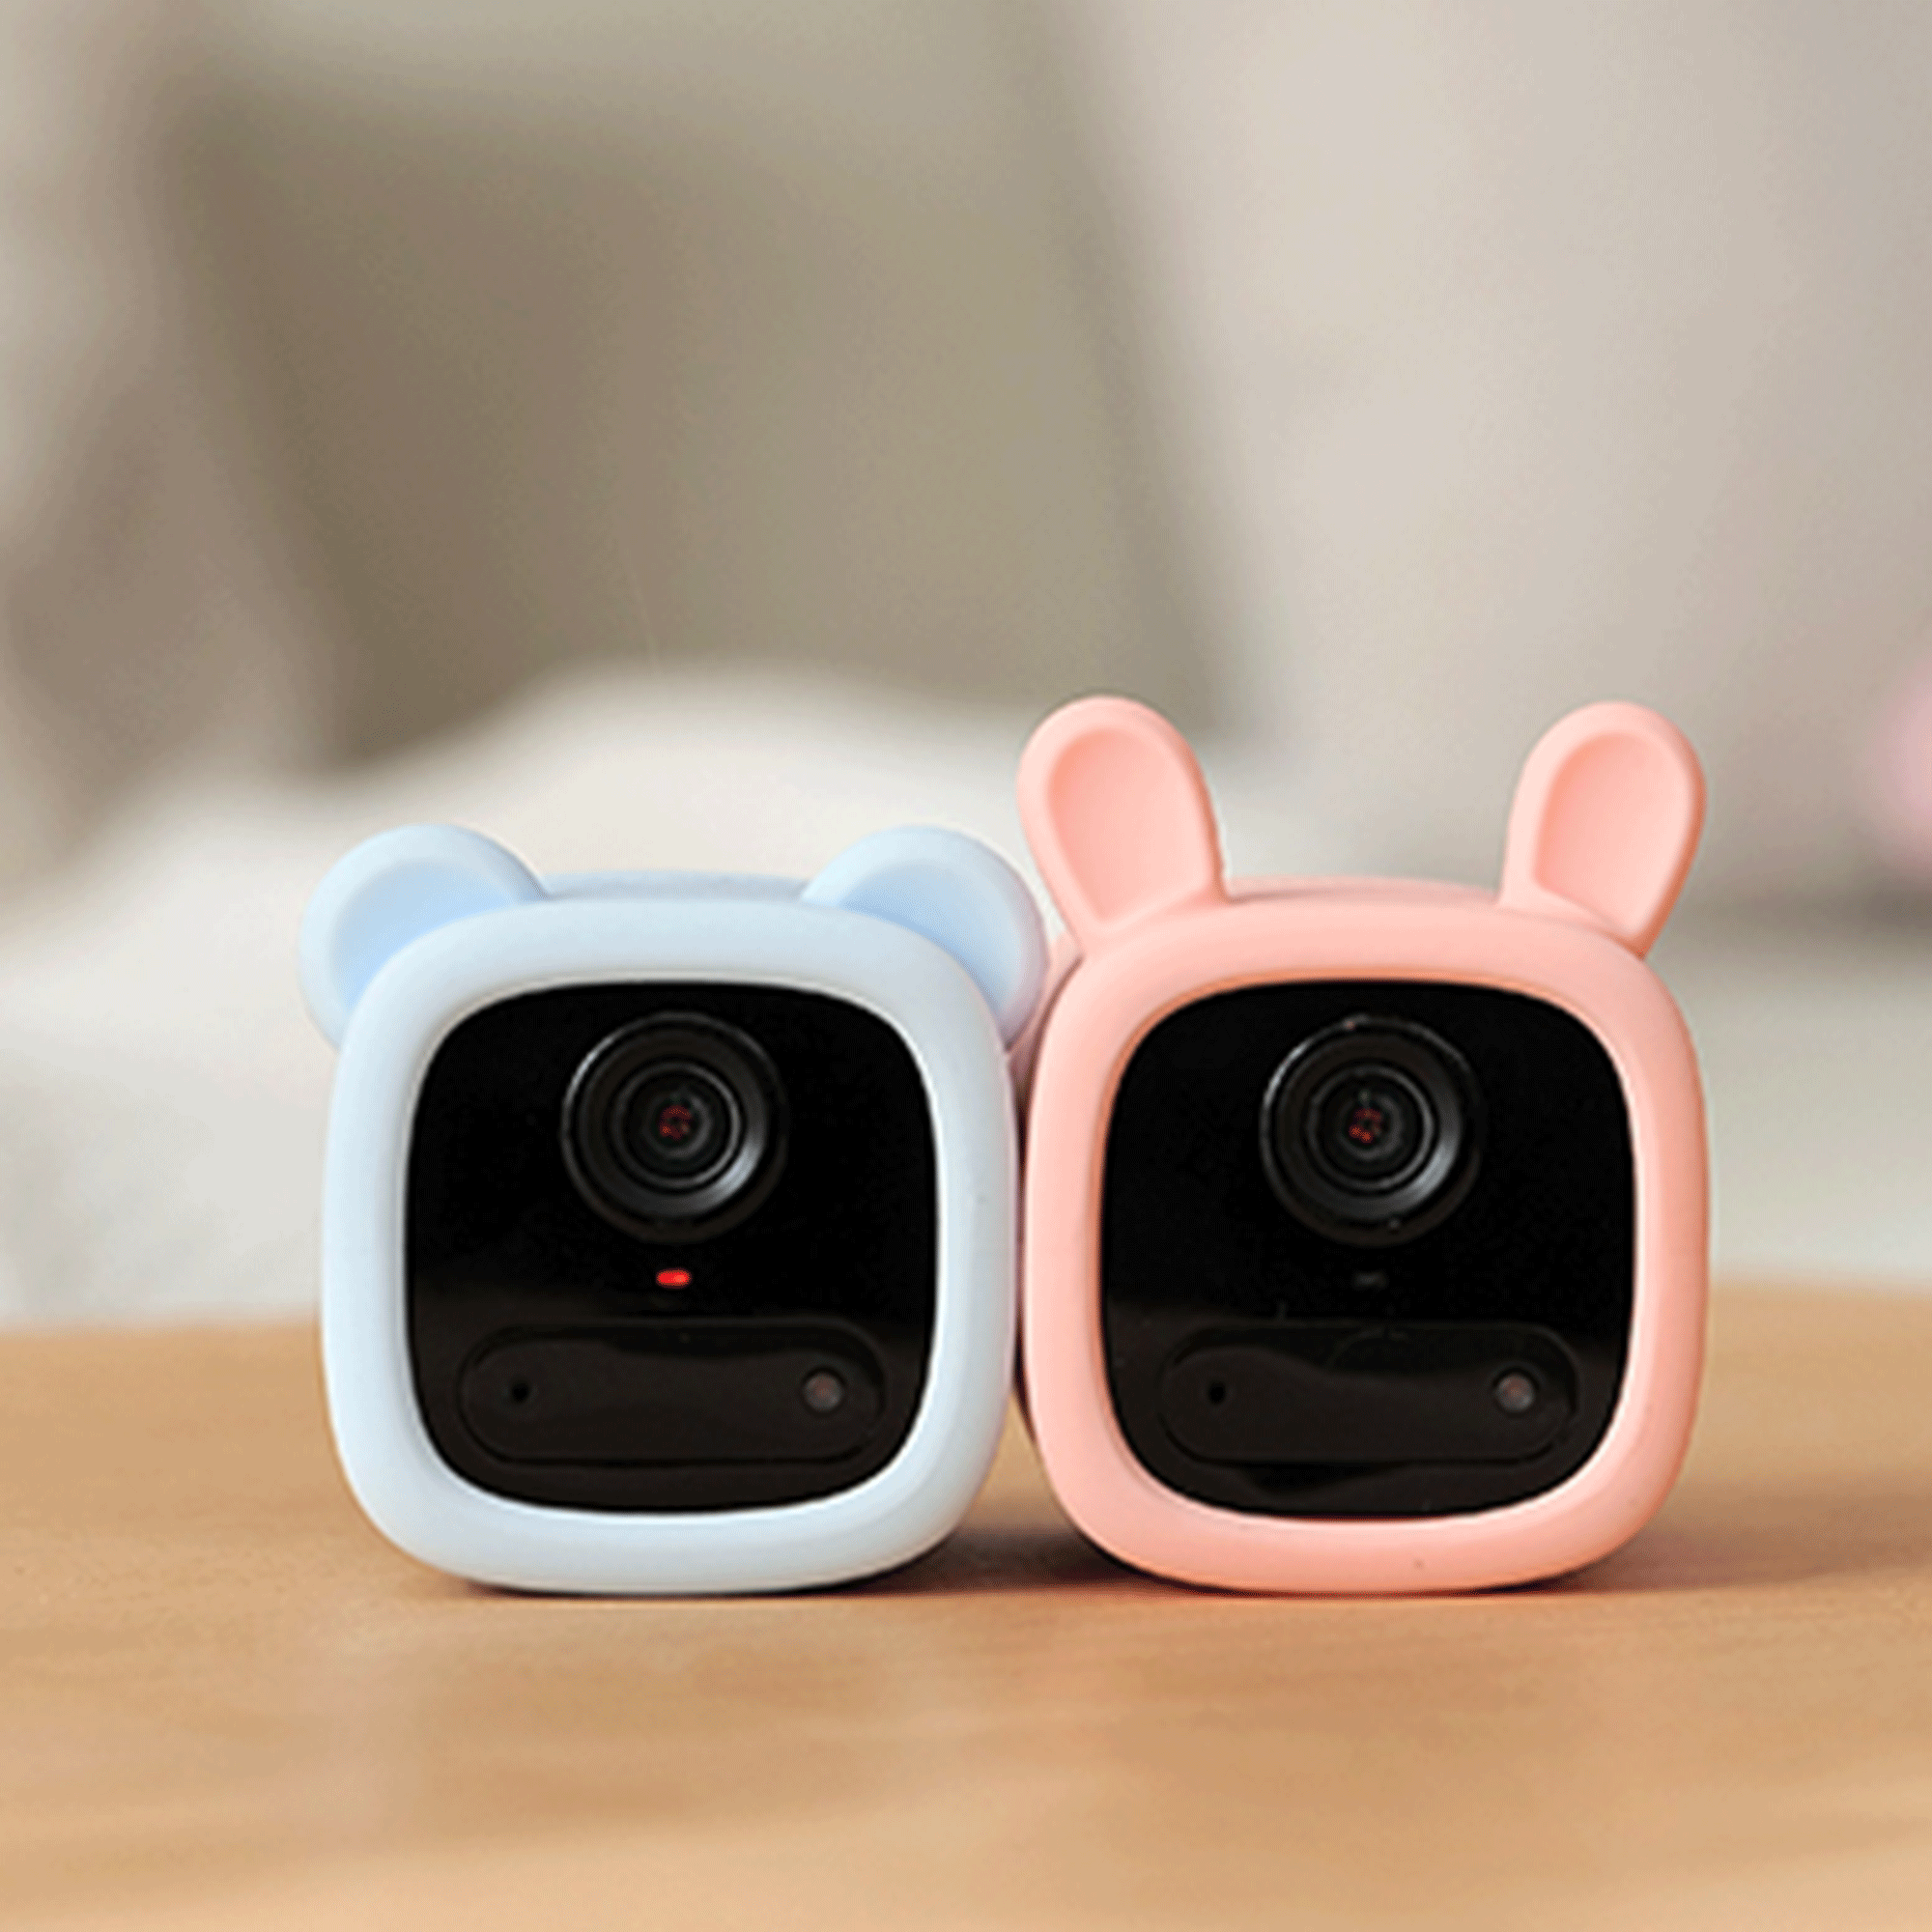 Baby camera in pink and blue cases